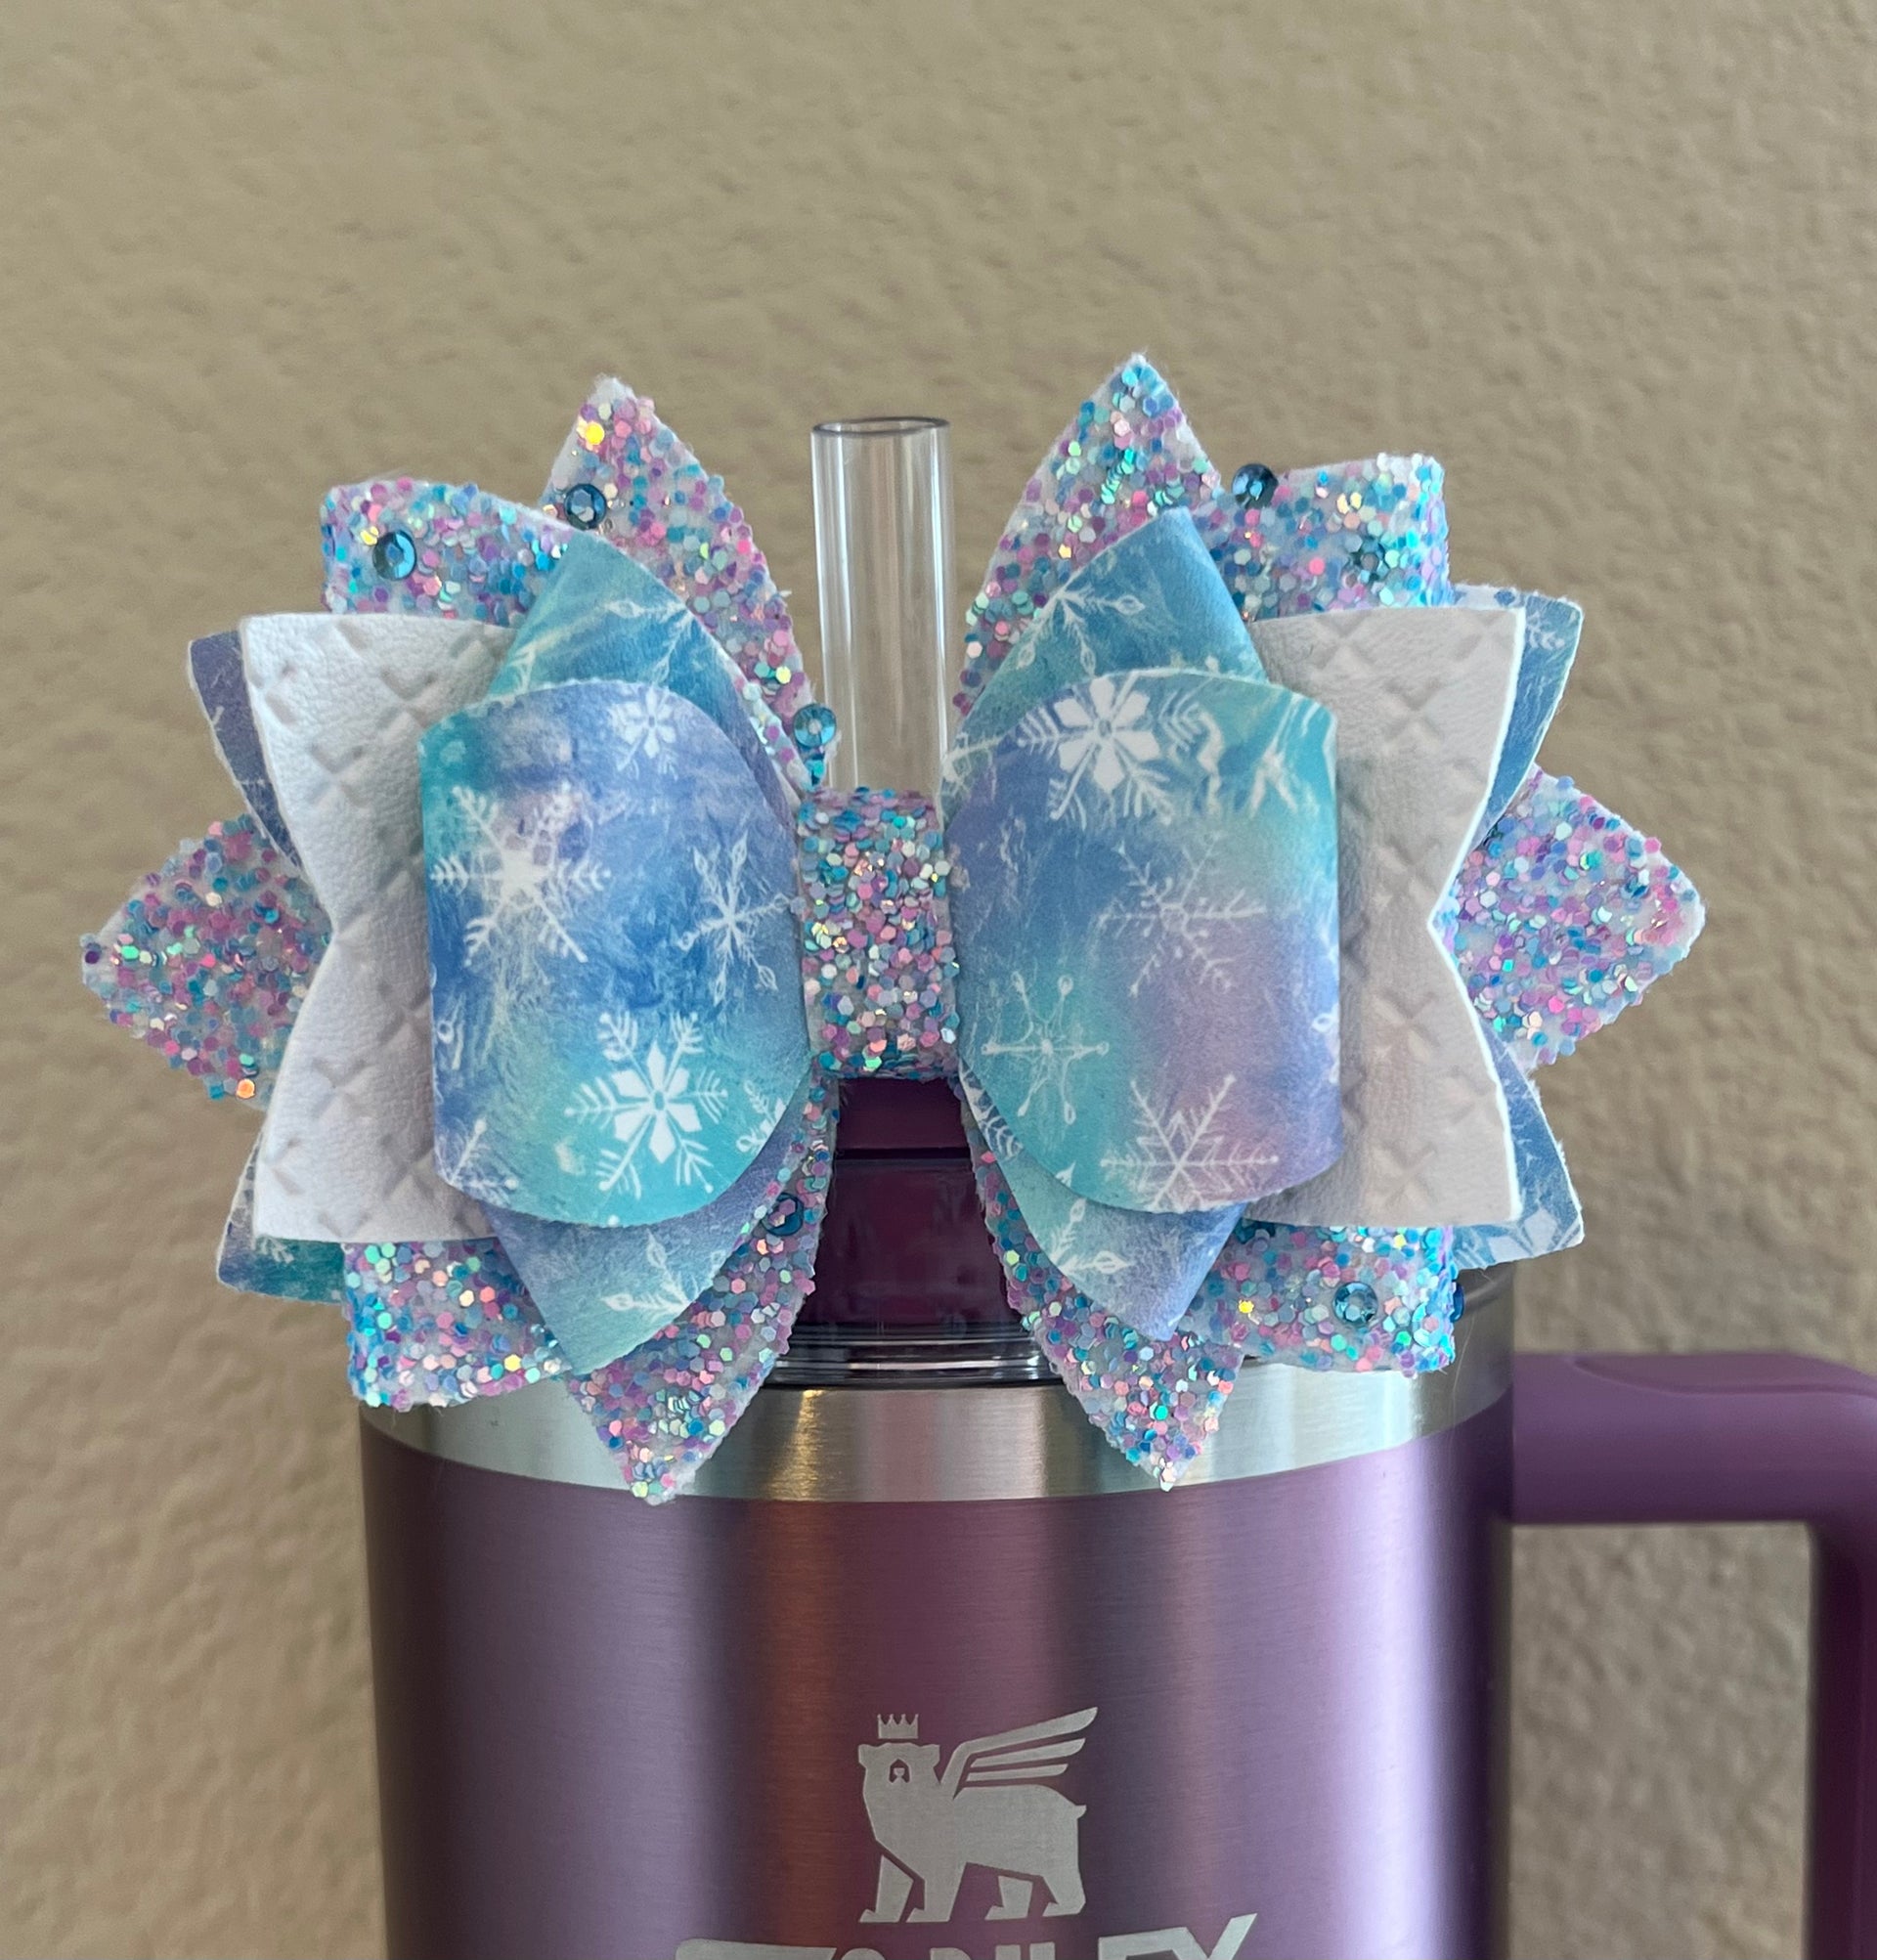 Straw Topper Christmas, Starbucks Bow Straw Topper, Bows for